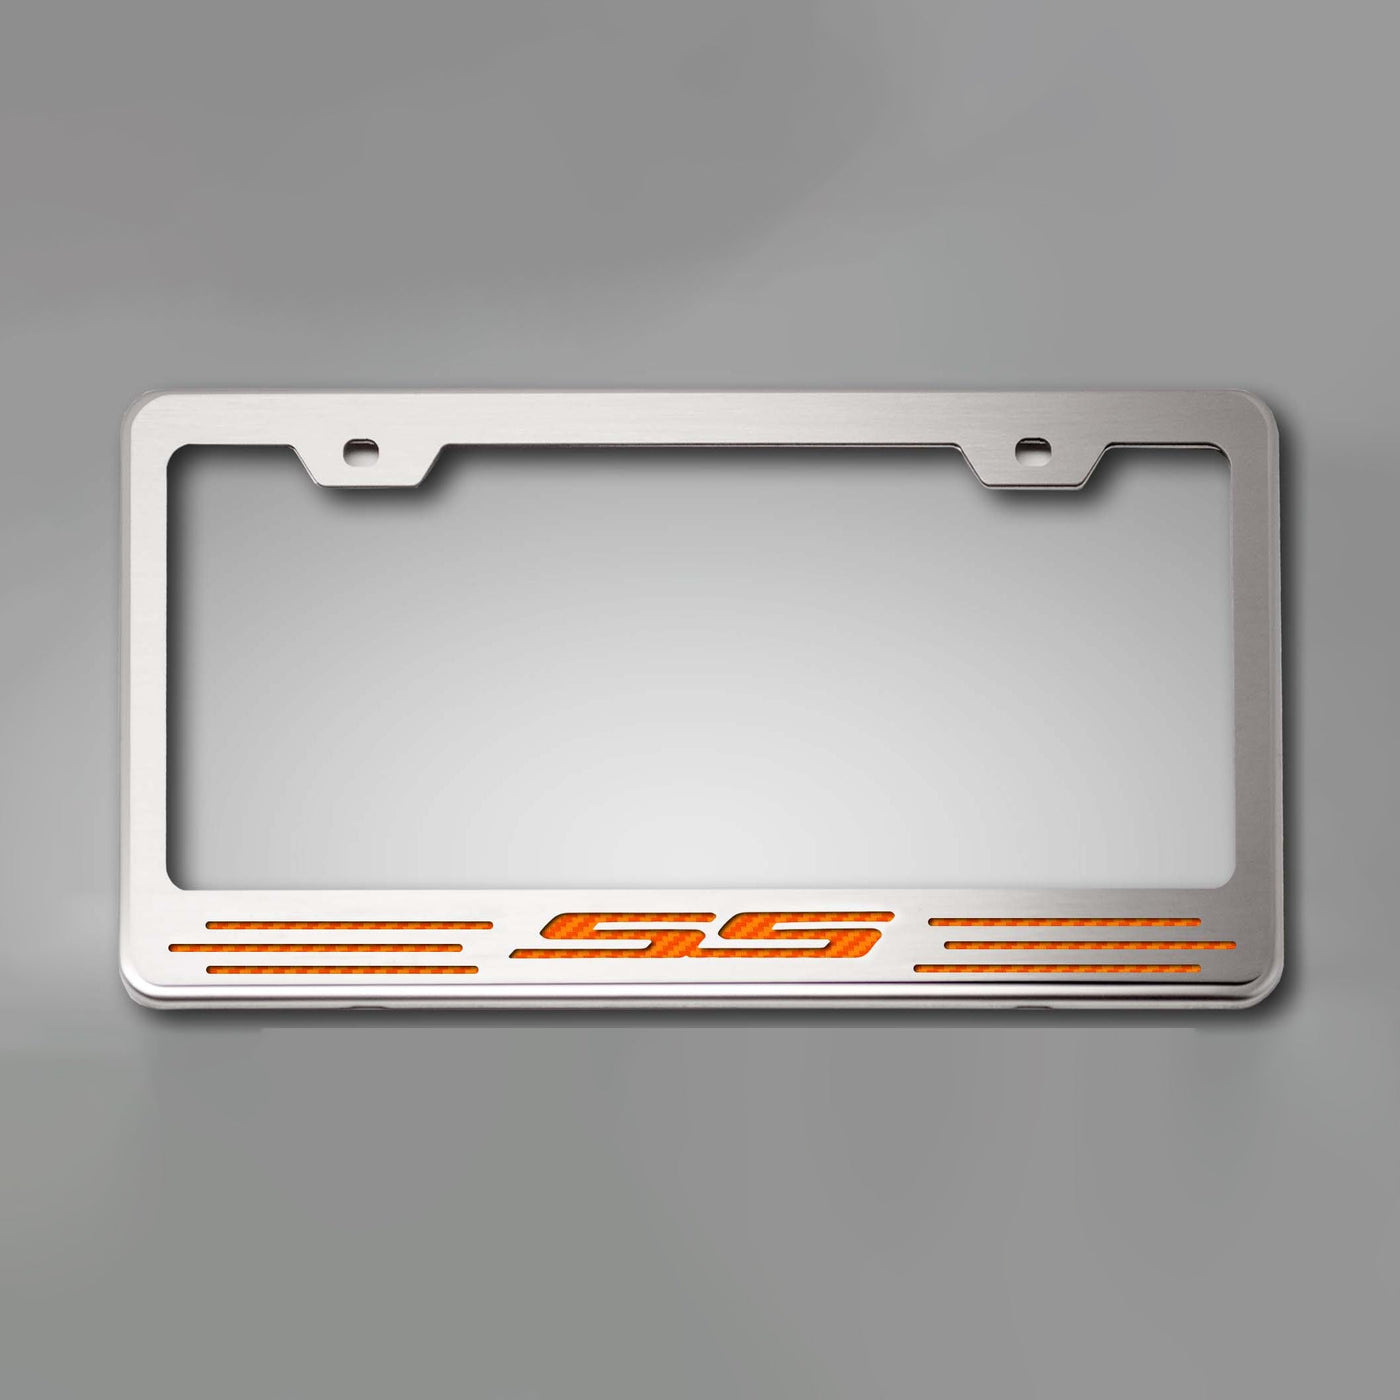 Camaro SS - License Plate Frame for Camaro with SS Lettering - Vinyl